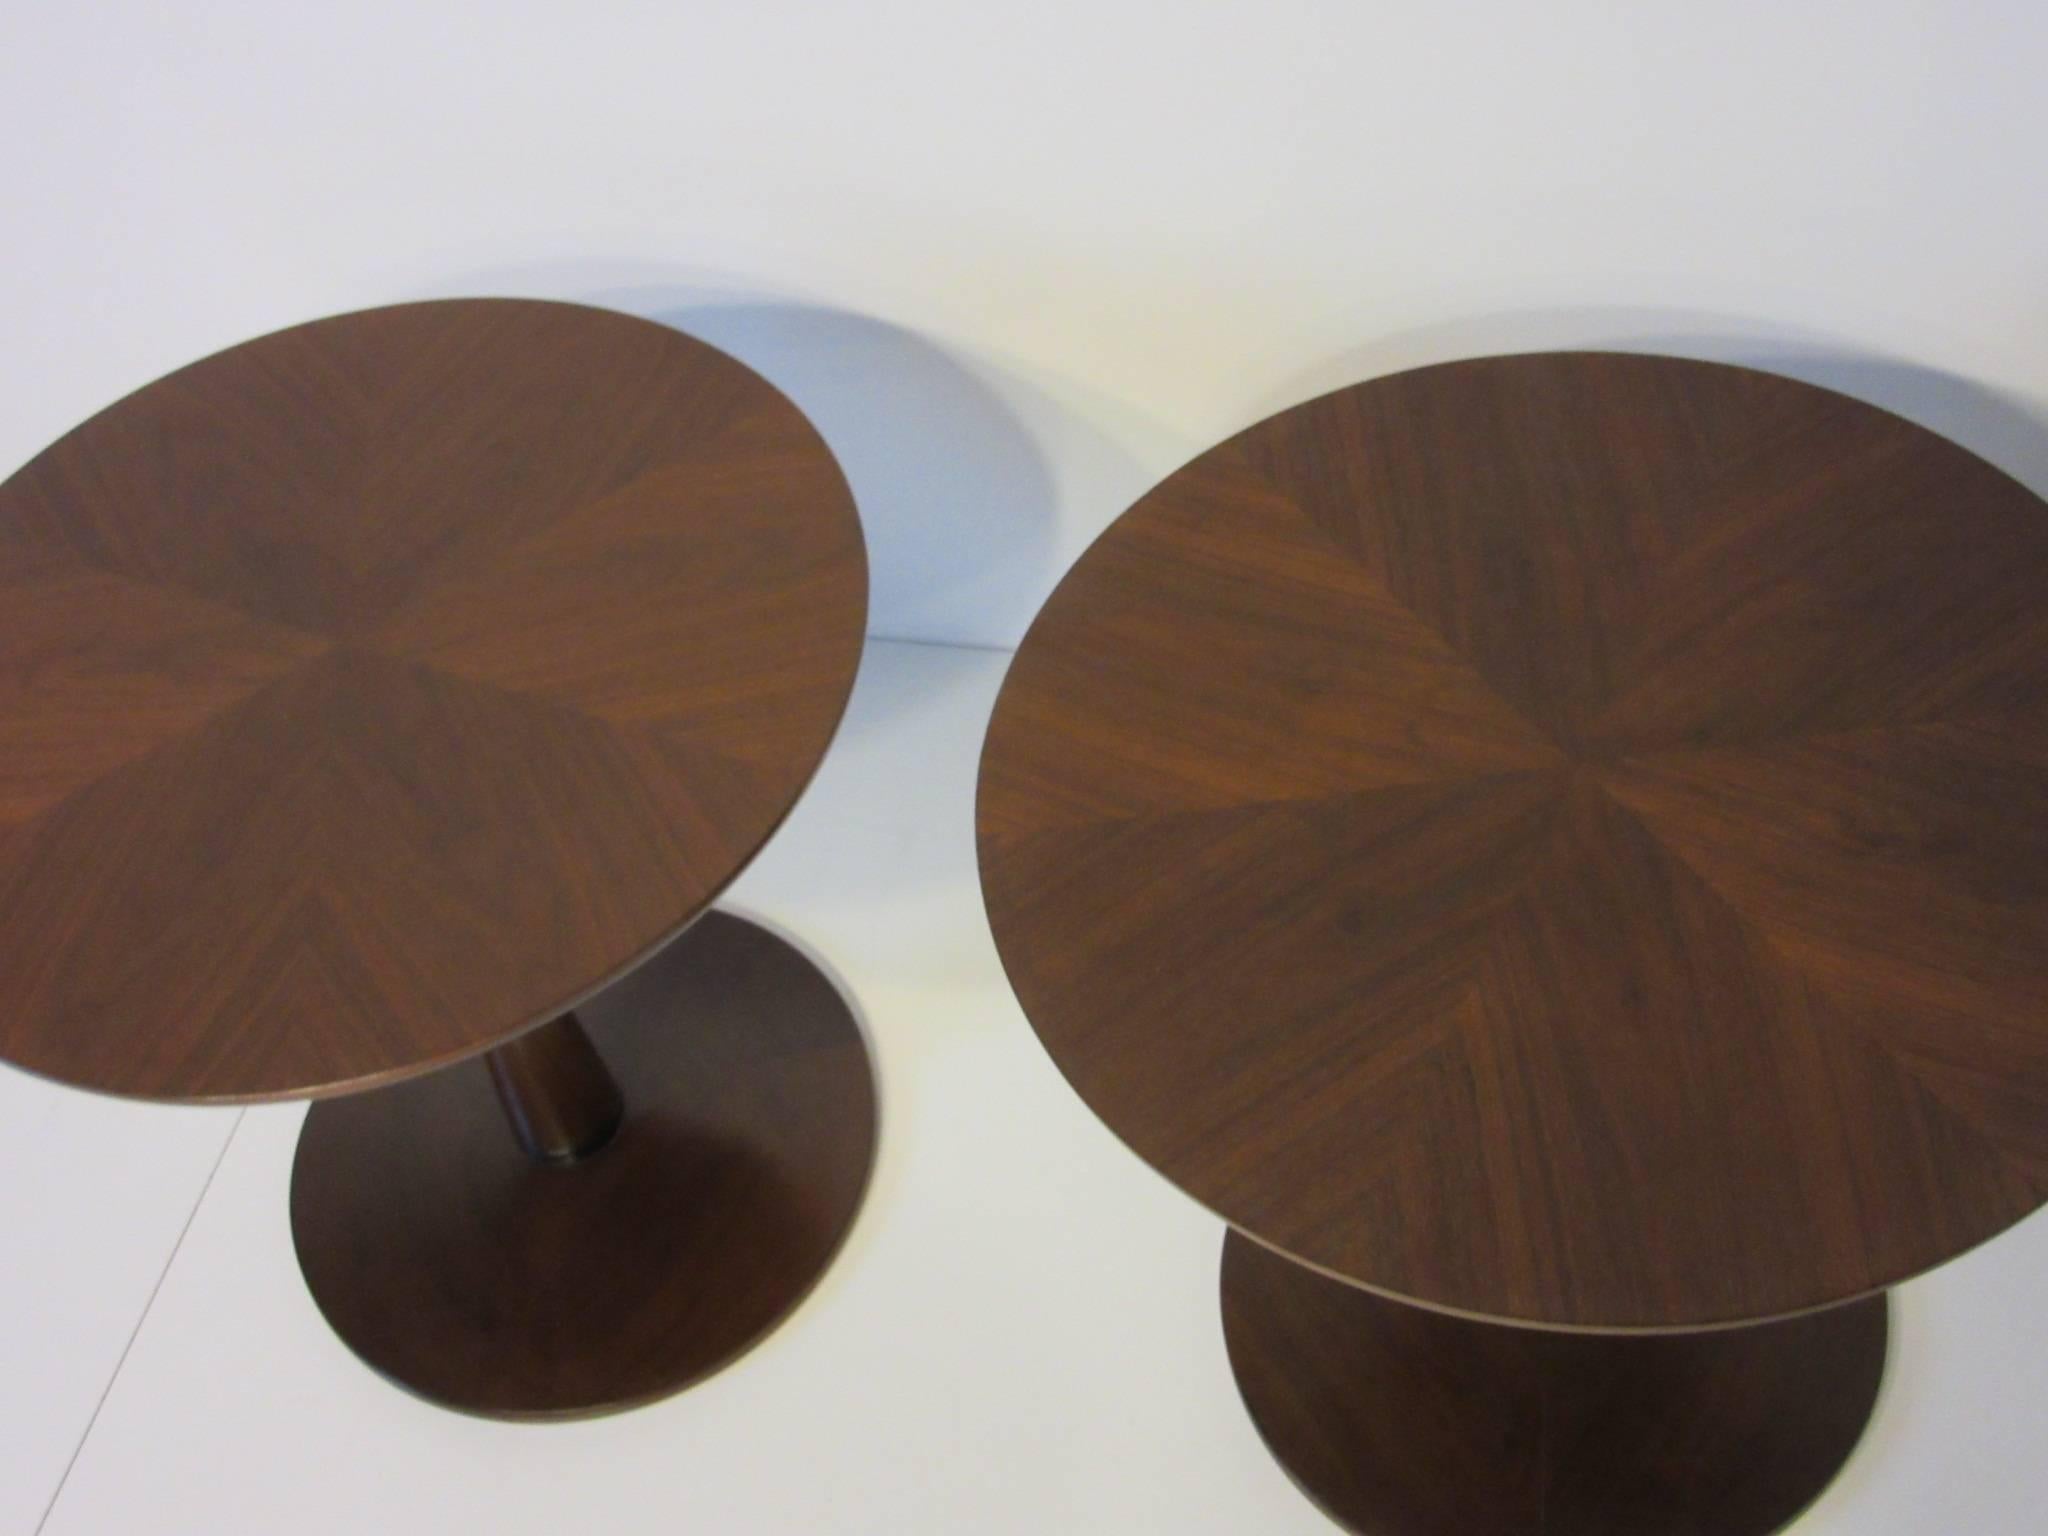 A pair of walnut pedestal side tables with great grained book matched walnut surface a curved top edge and round base with black ebony detail. Manufactured by the Drexel Furniture company for the Declaration collection.